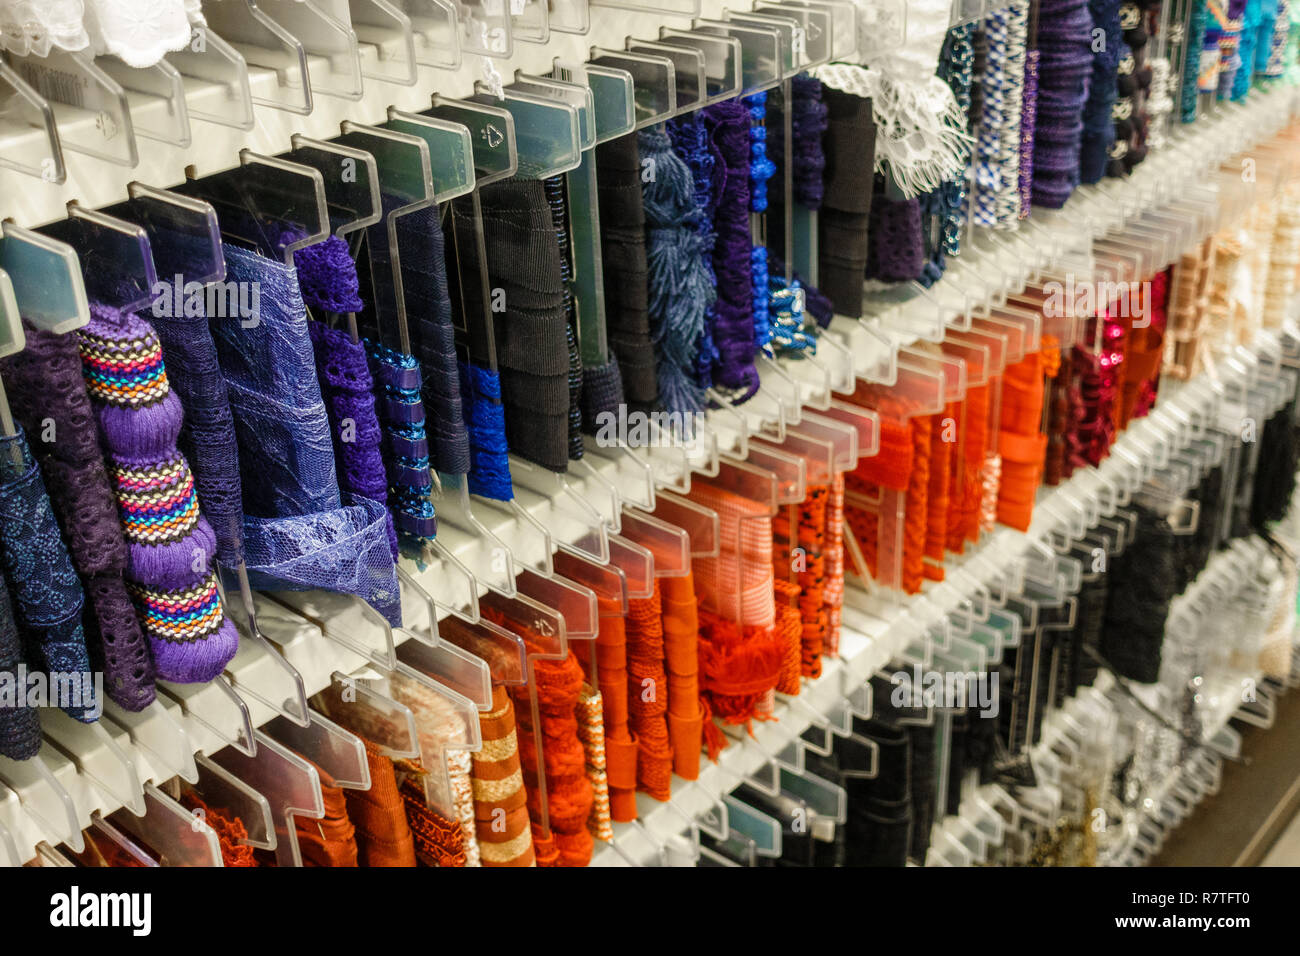 Variety of lace for sale Stock Photo